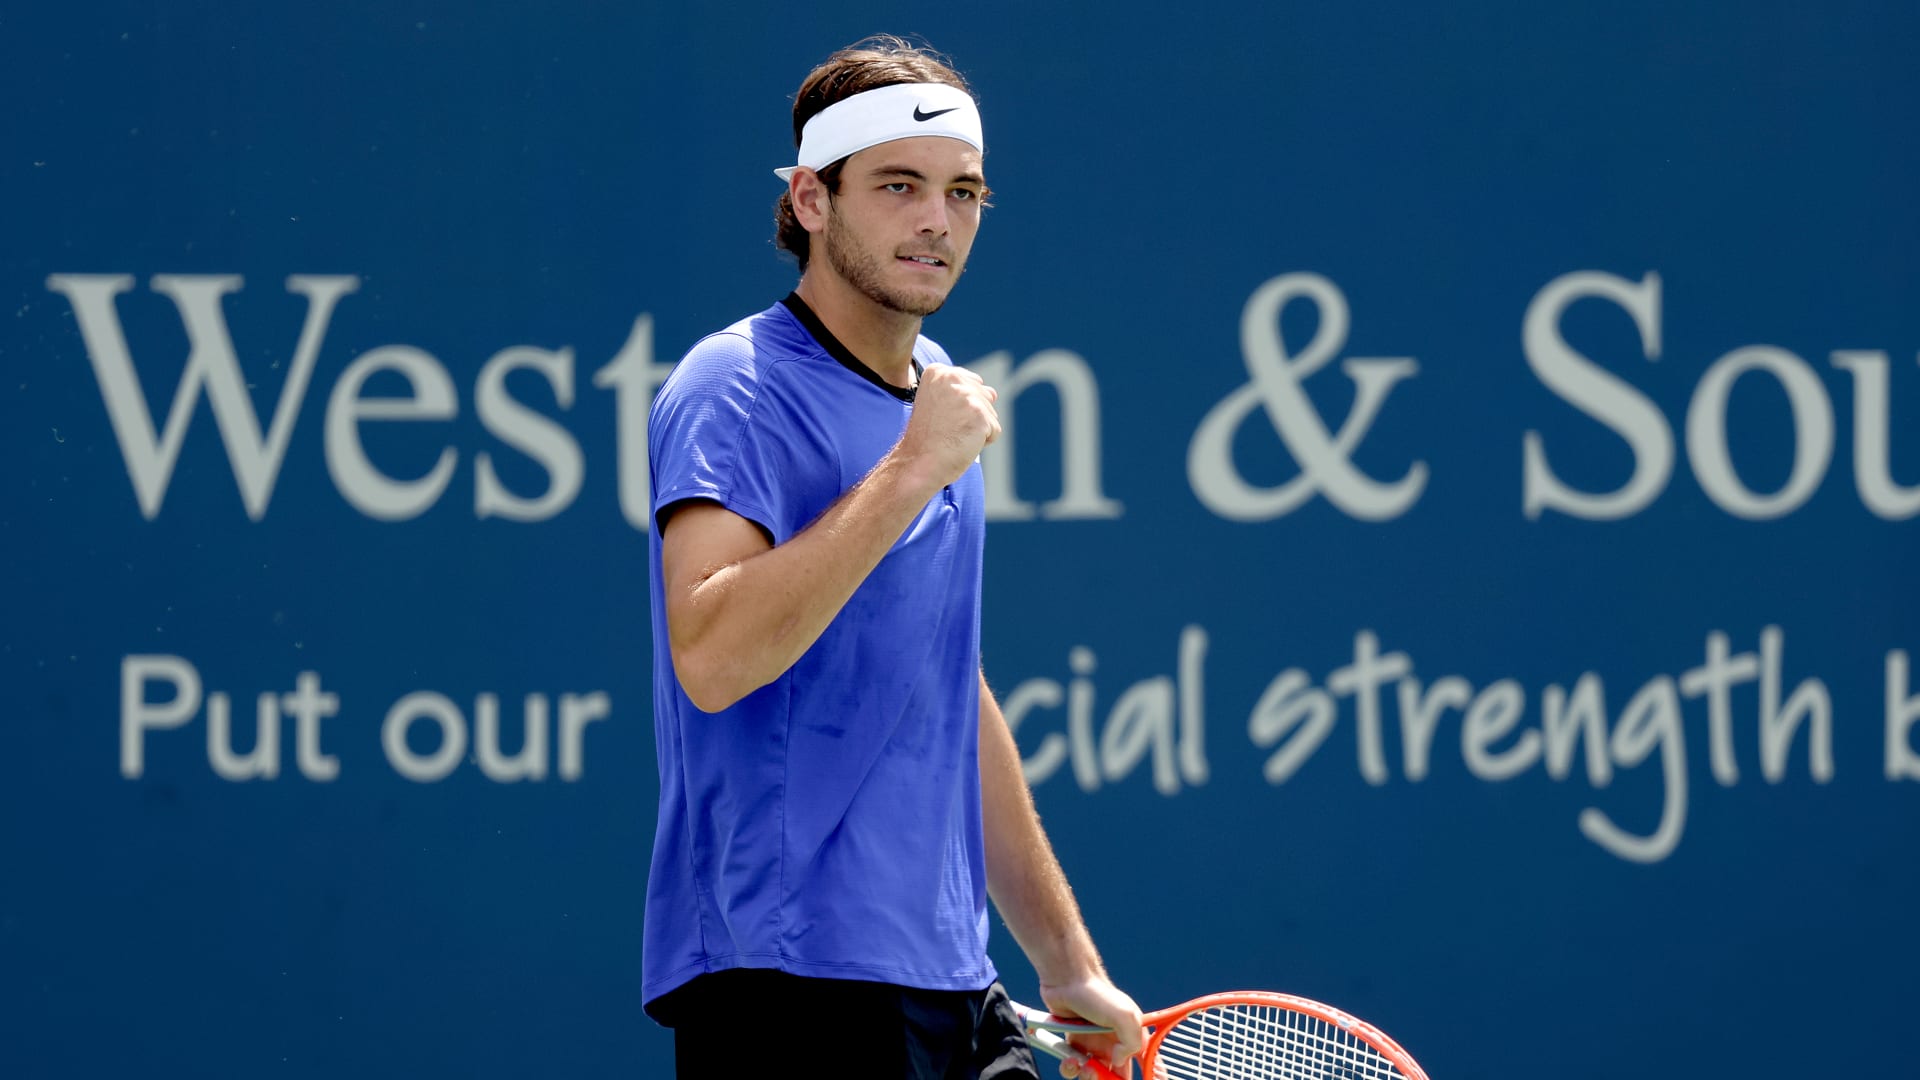 Taylor Fritz moves past fatigued Kyrgios in Cincinnati round two